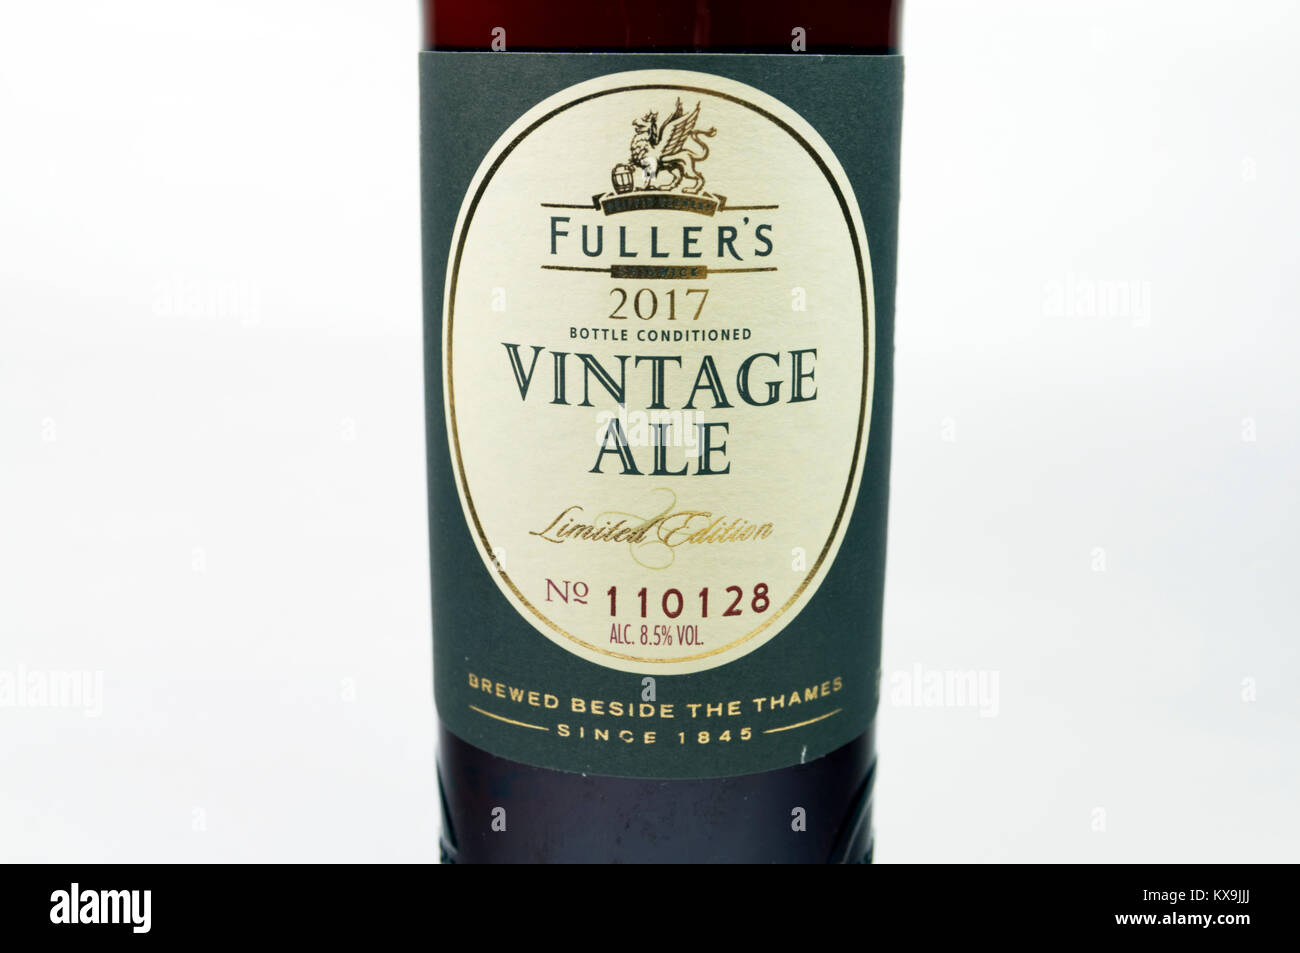 Fullers limited edition Vintage Ale, 2017. Stock Photo